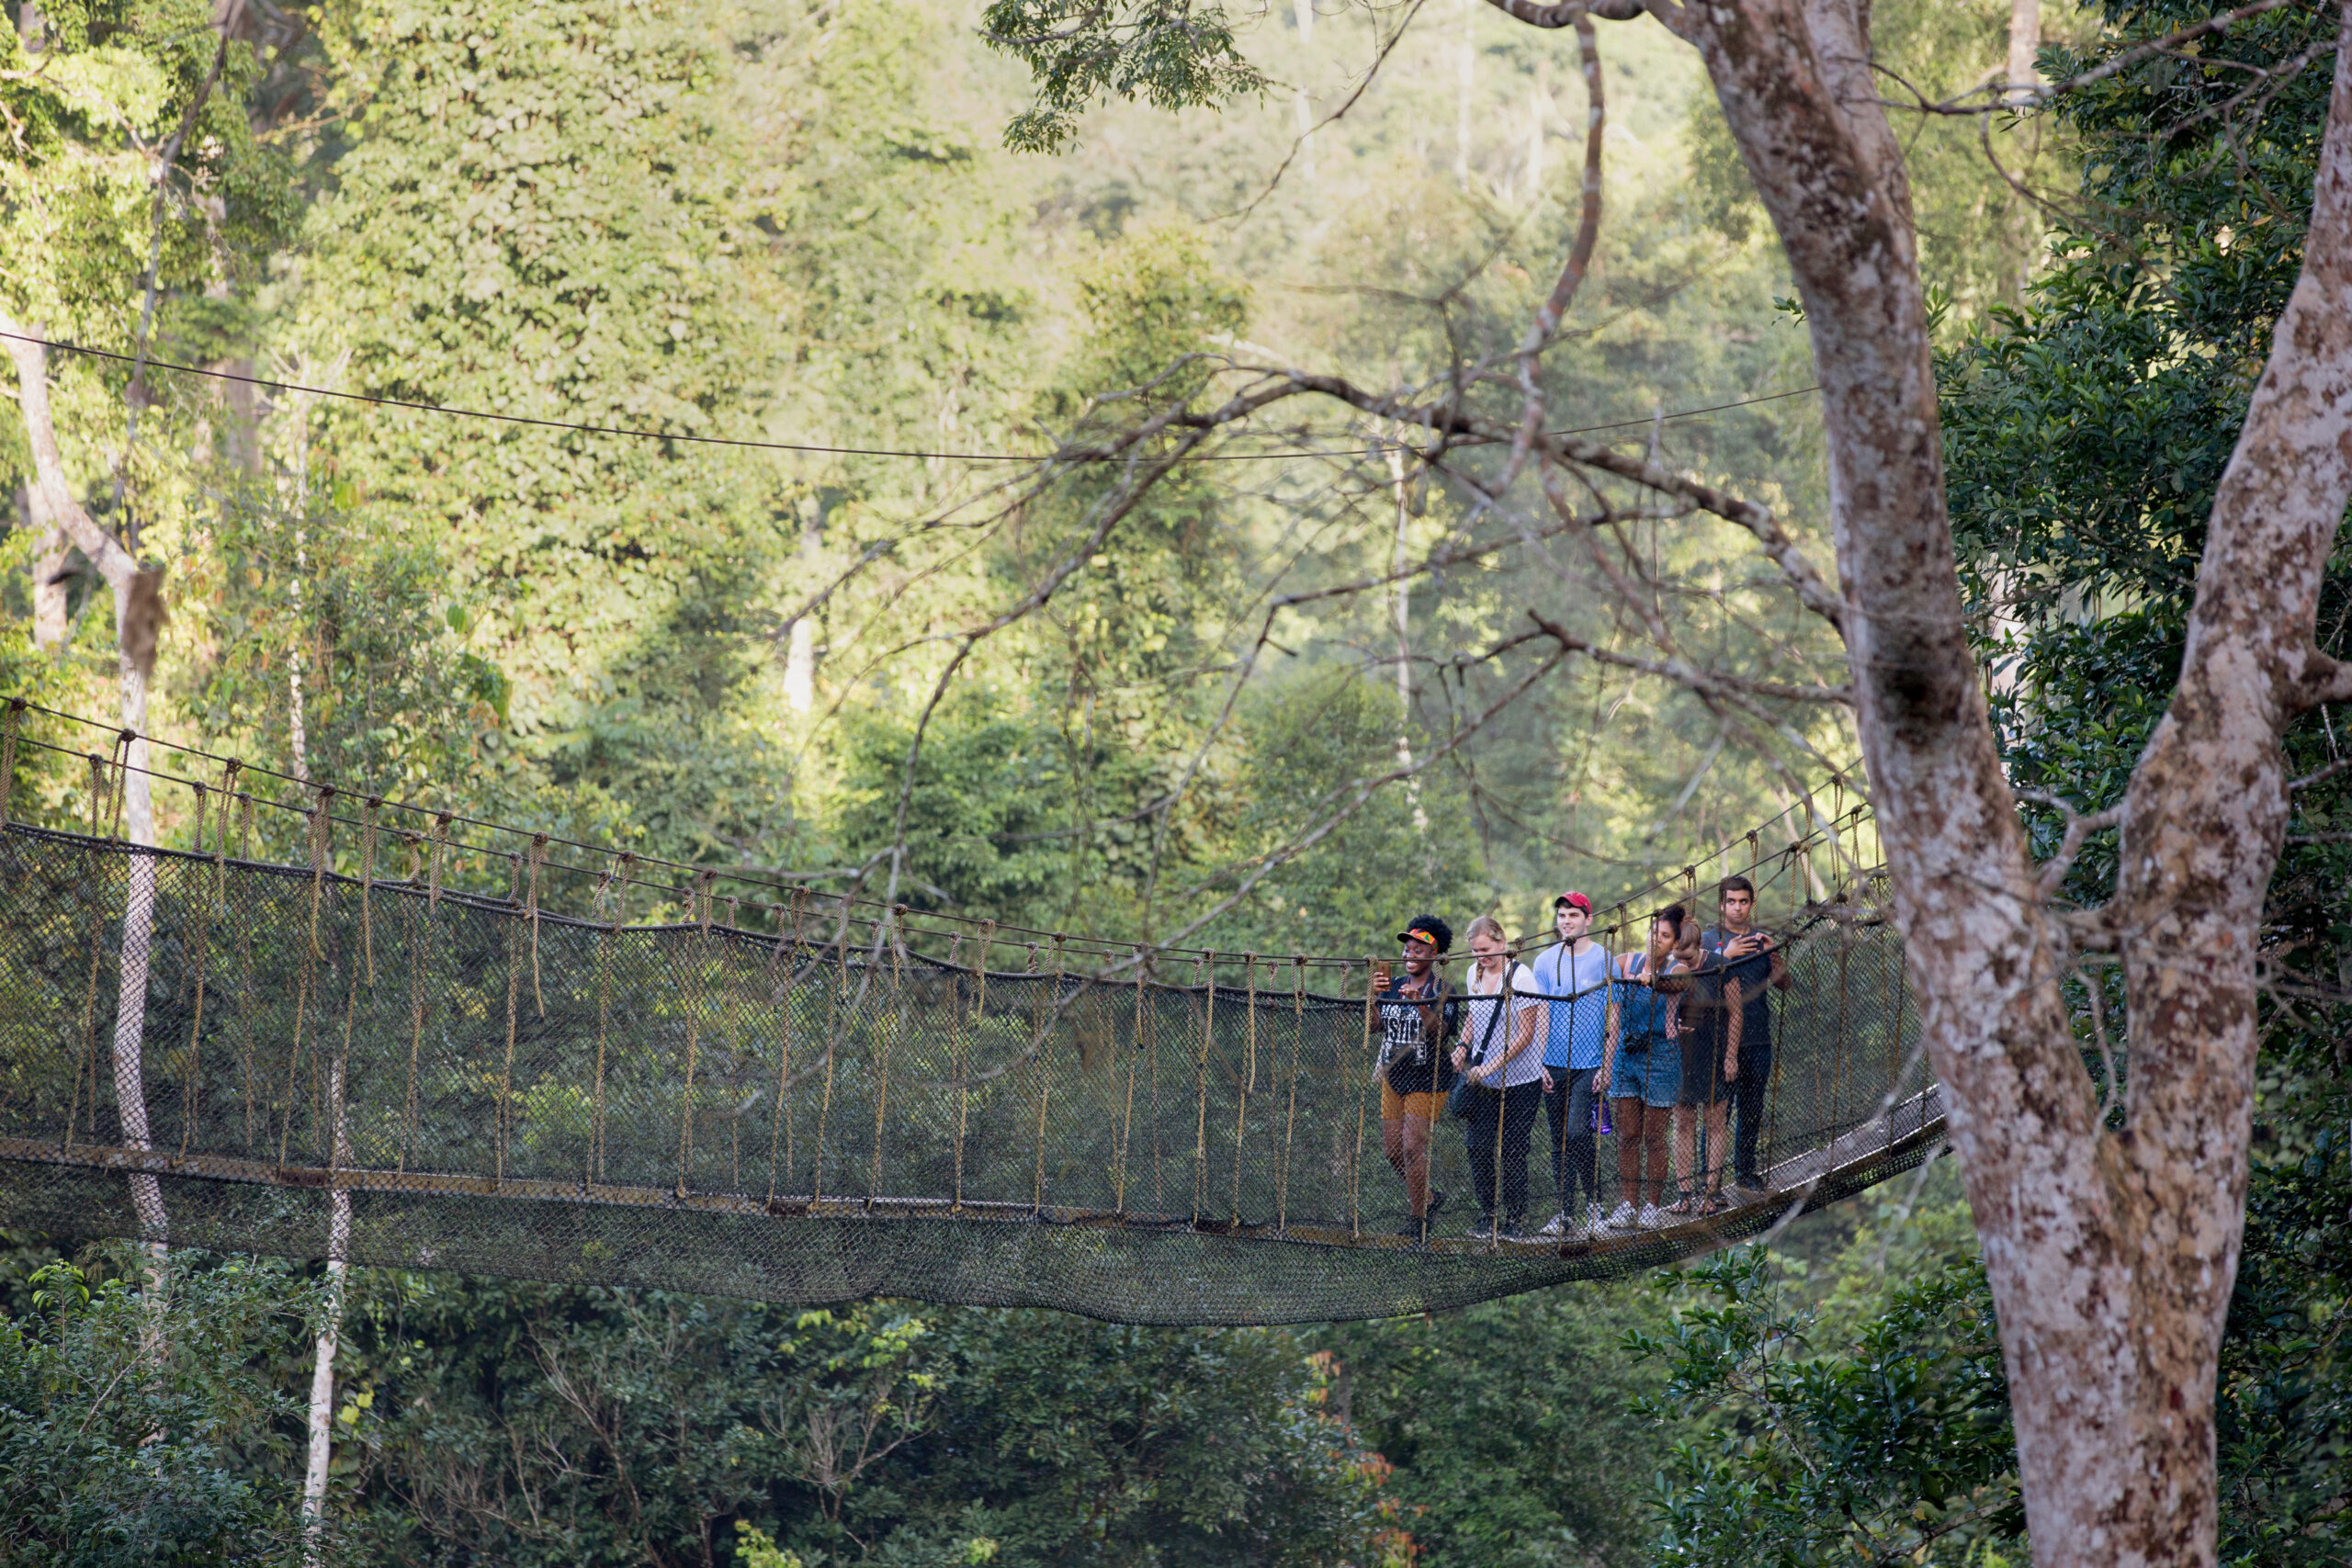 Students walking on a wooden bridge suspended between trees in the forest.